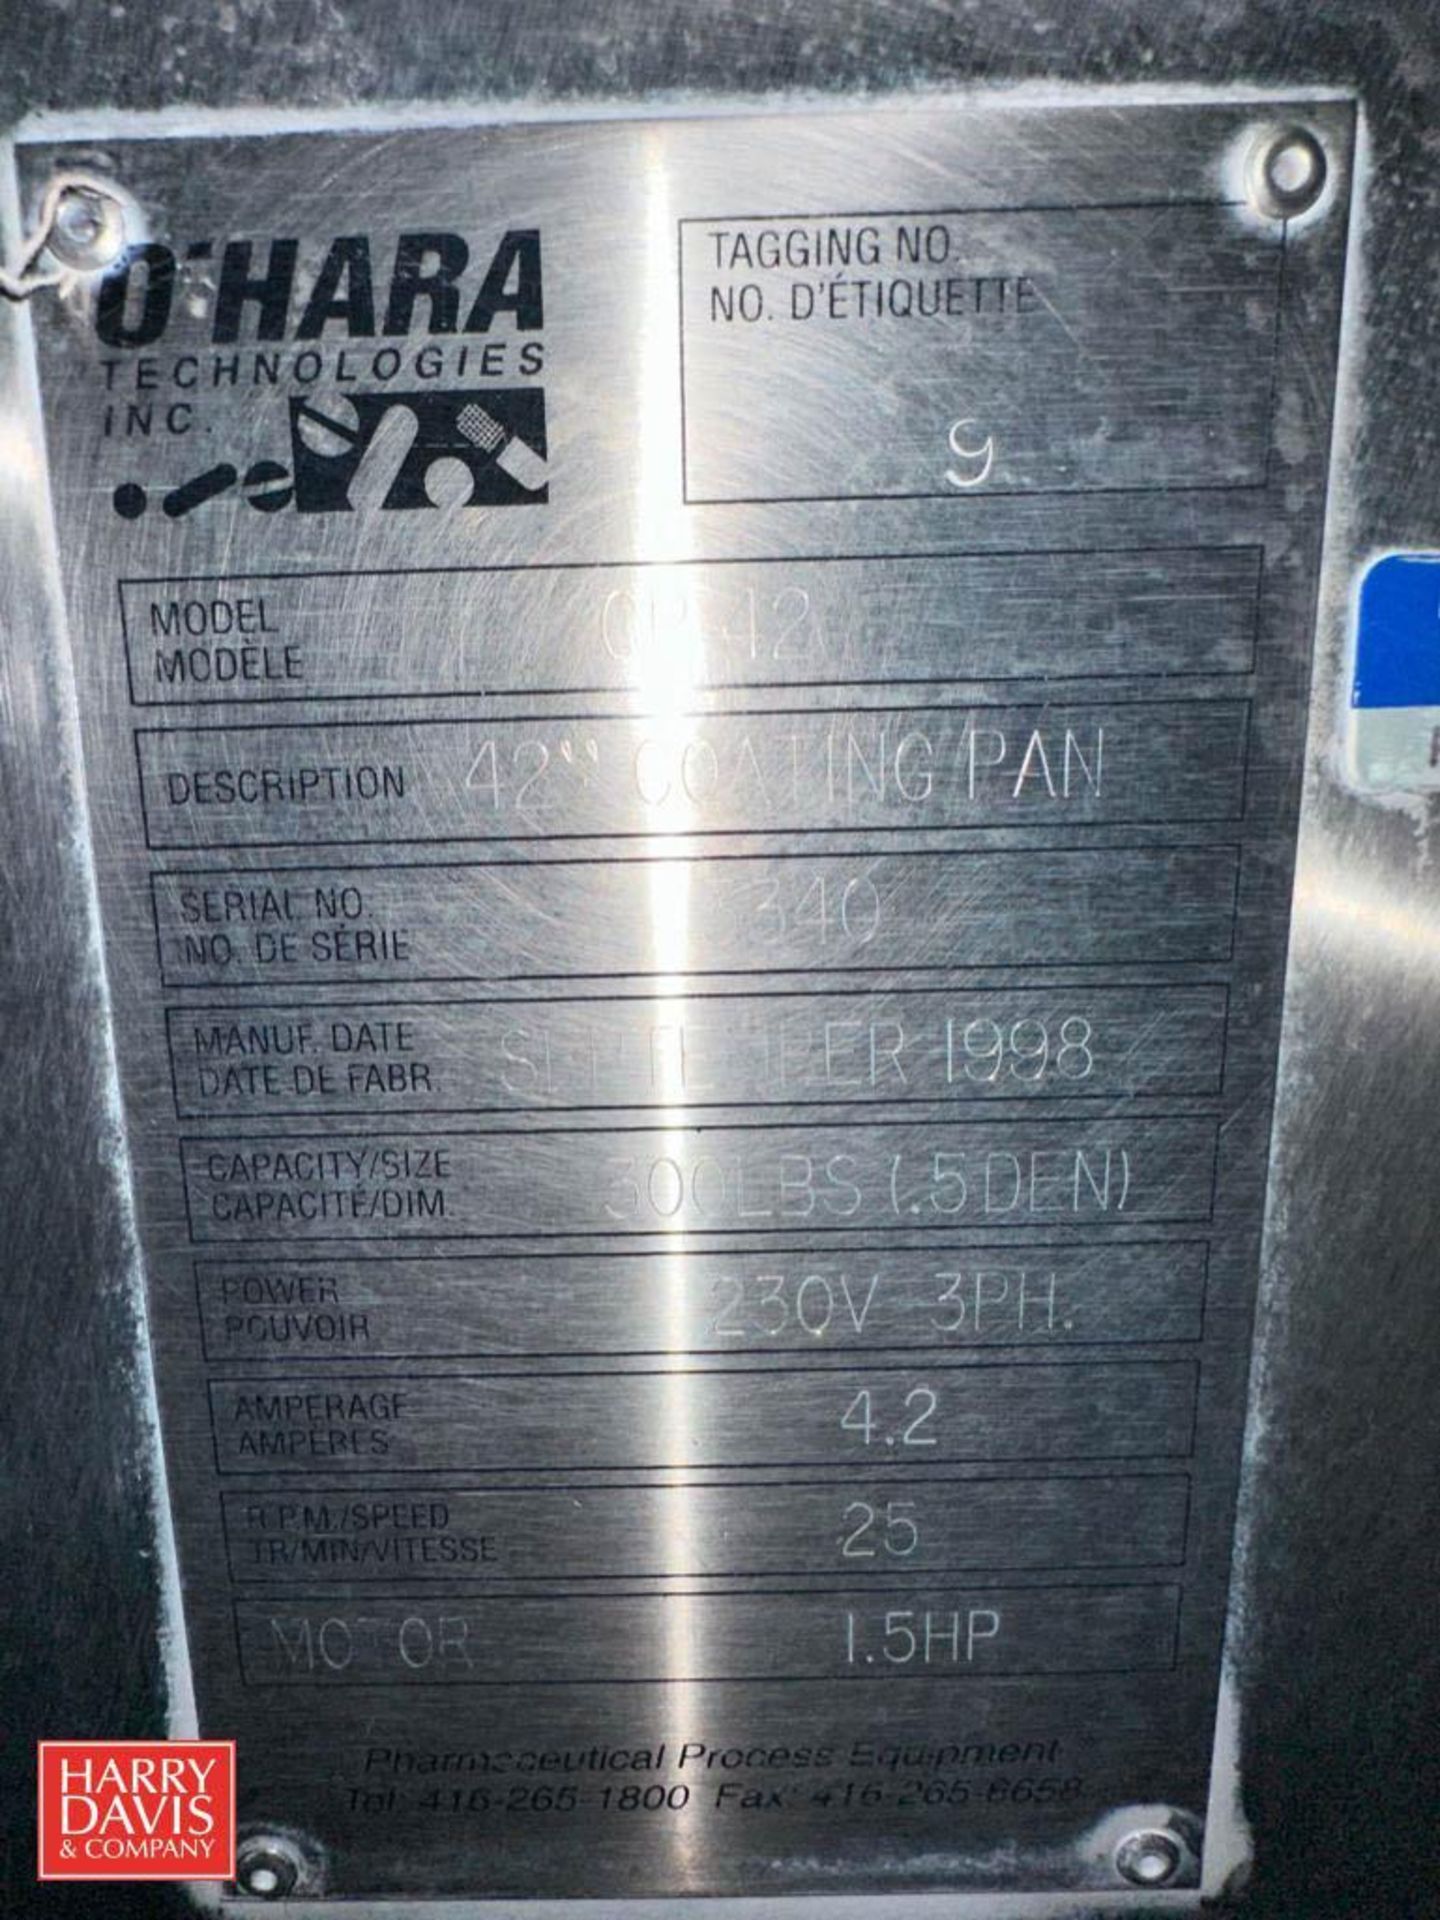 O’Hara S/S 42" Dual-Chamber Coating Pan, Model: CP42, S/N: 3340 and 3340 with (2) Syntron Vibratory - Image 4 of 8